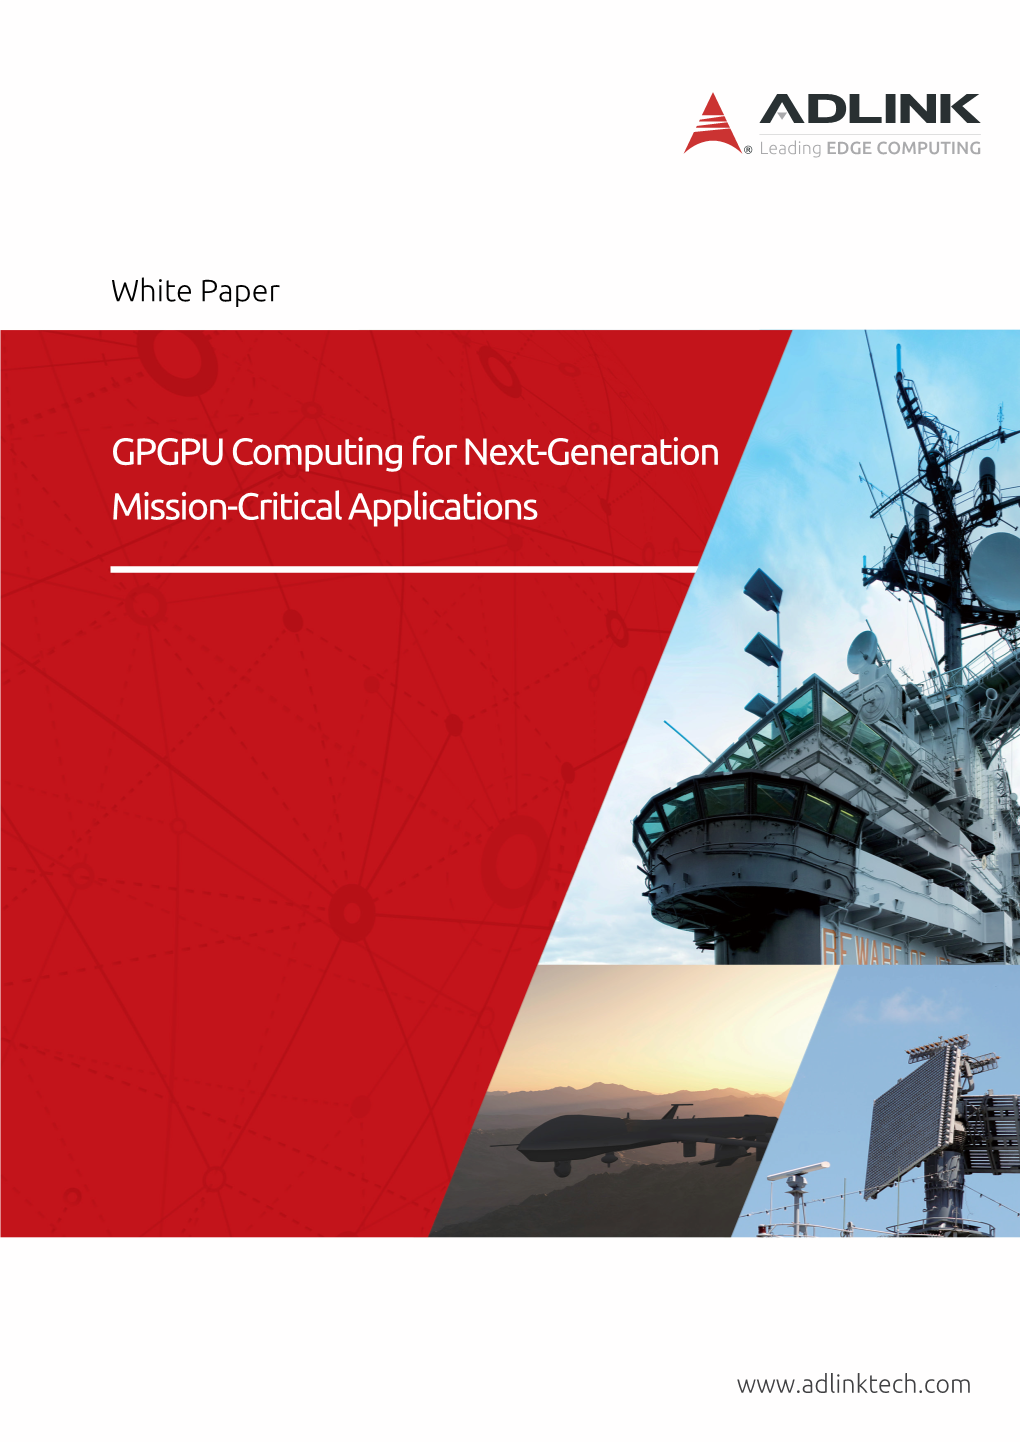 GPGPU Computing for Next-Generation Mission-Critical Applications